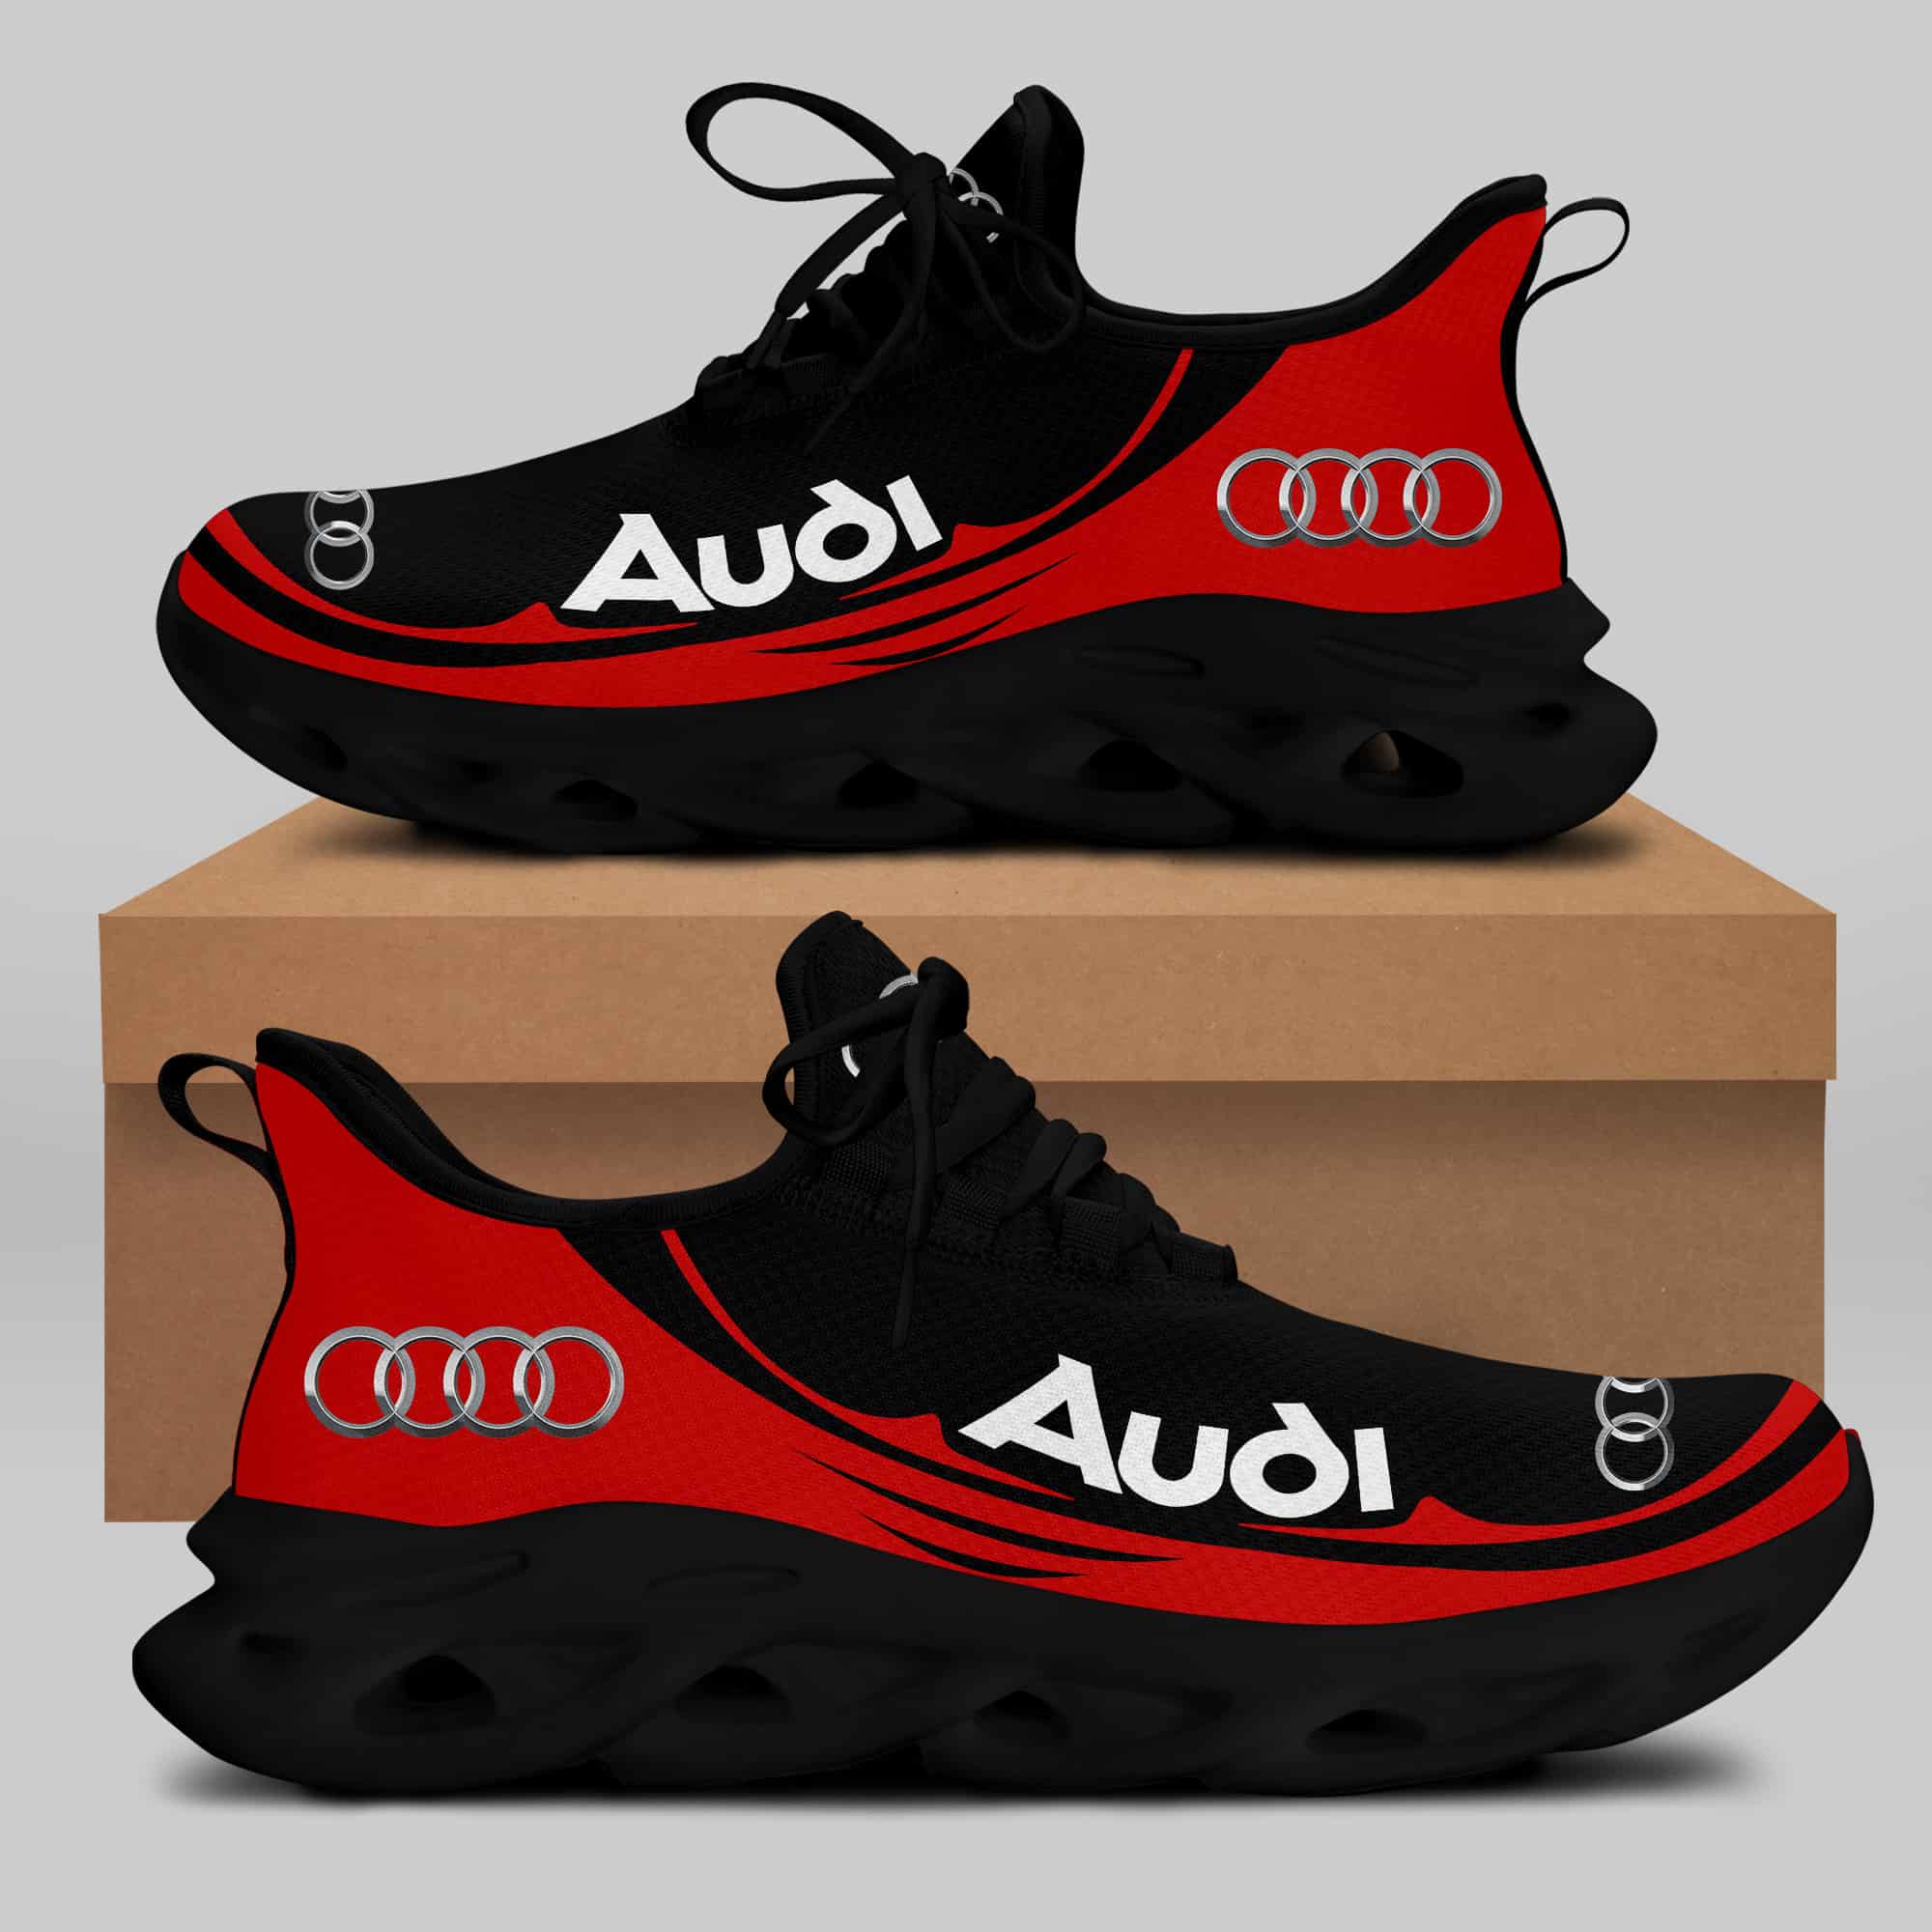 Audi Sport Running Shoes Max Soul Shoes Sneakers Ver 43 1